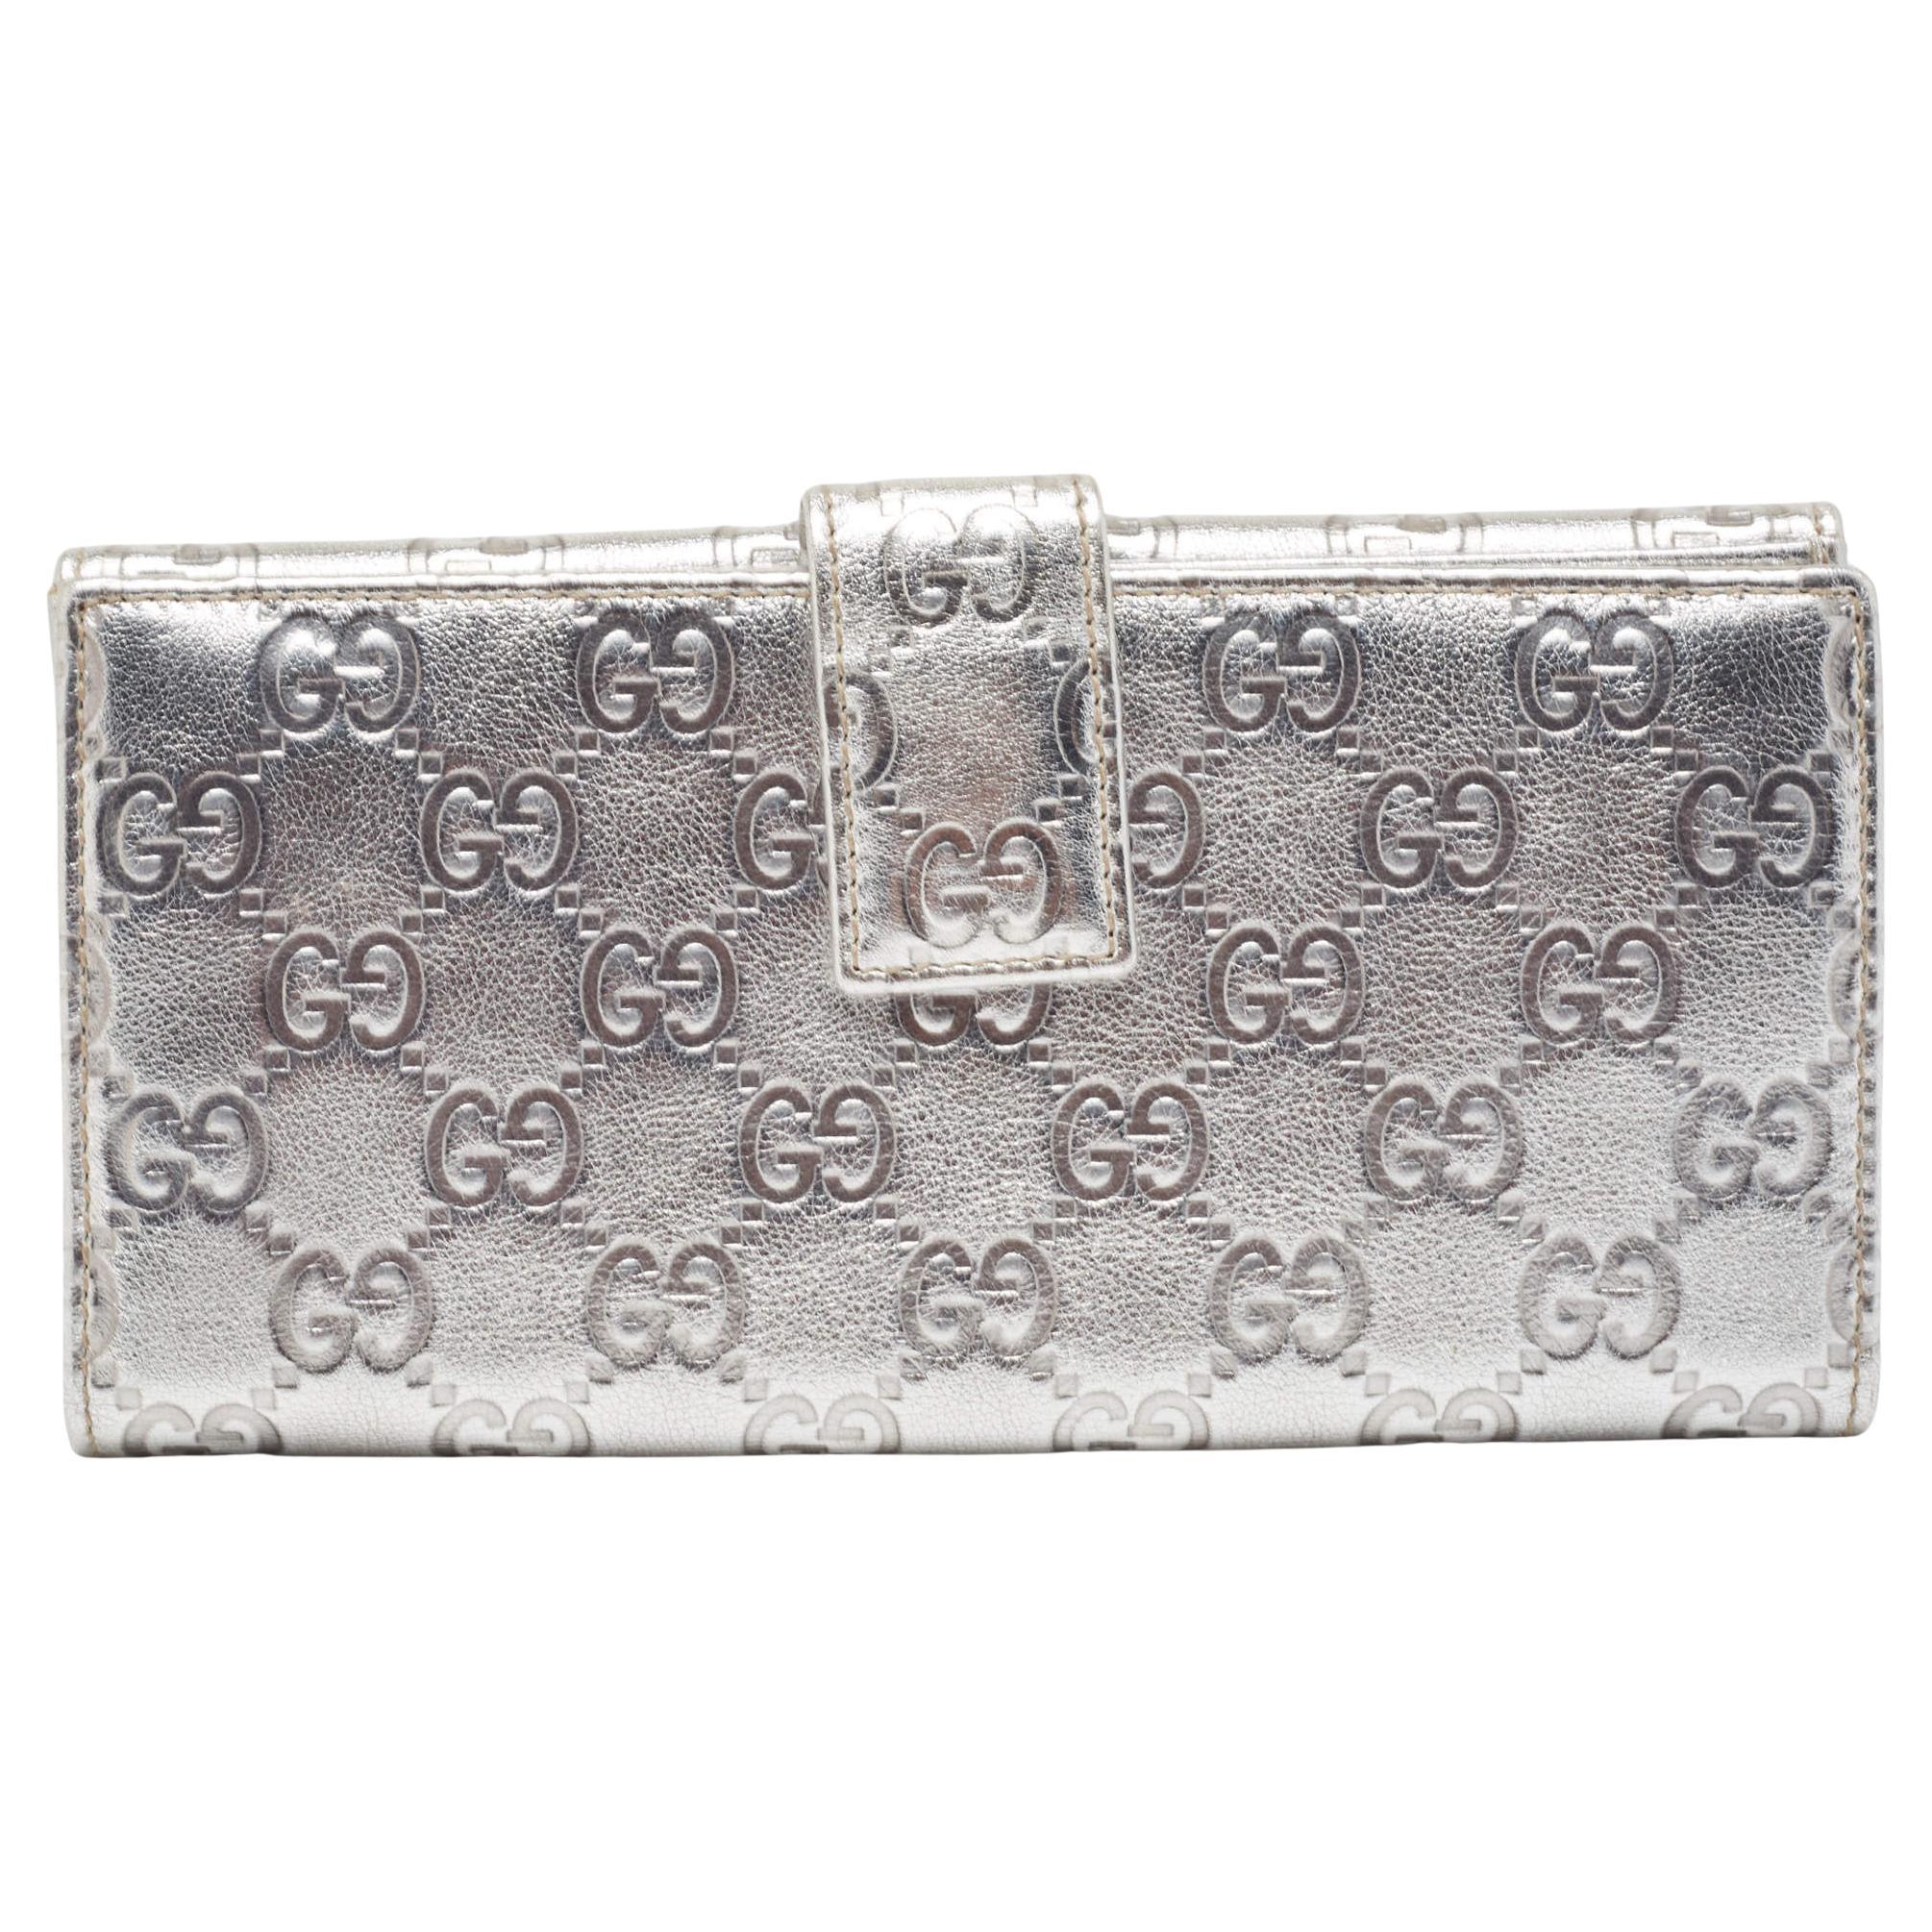 Gucci Silver Guccissima Leather Flap Continental Wallet